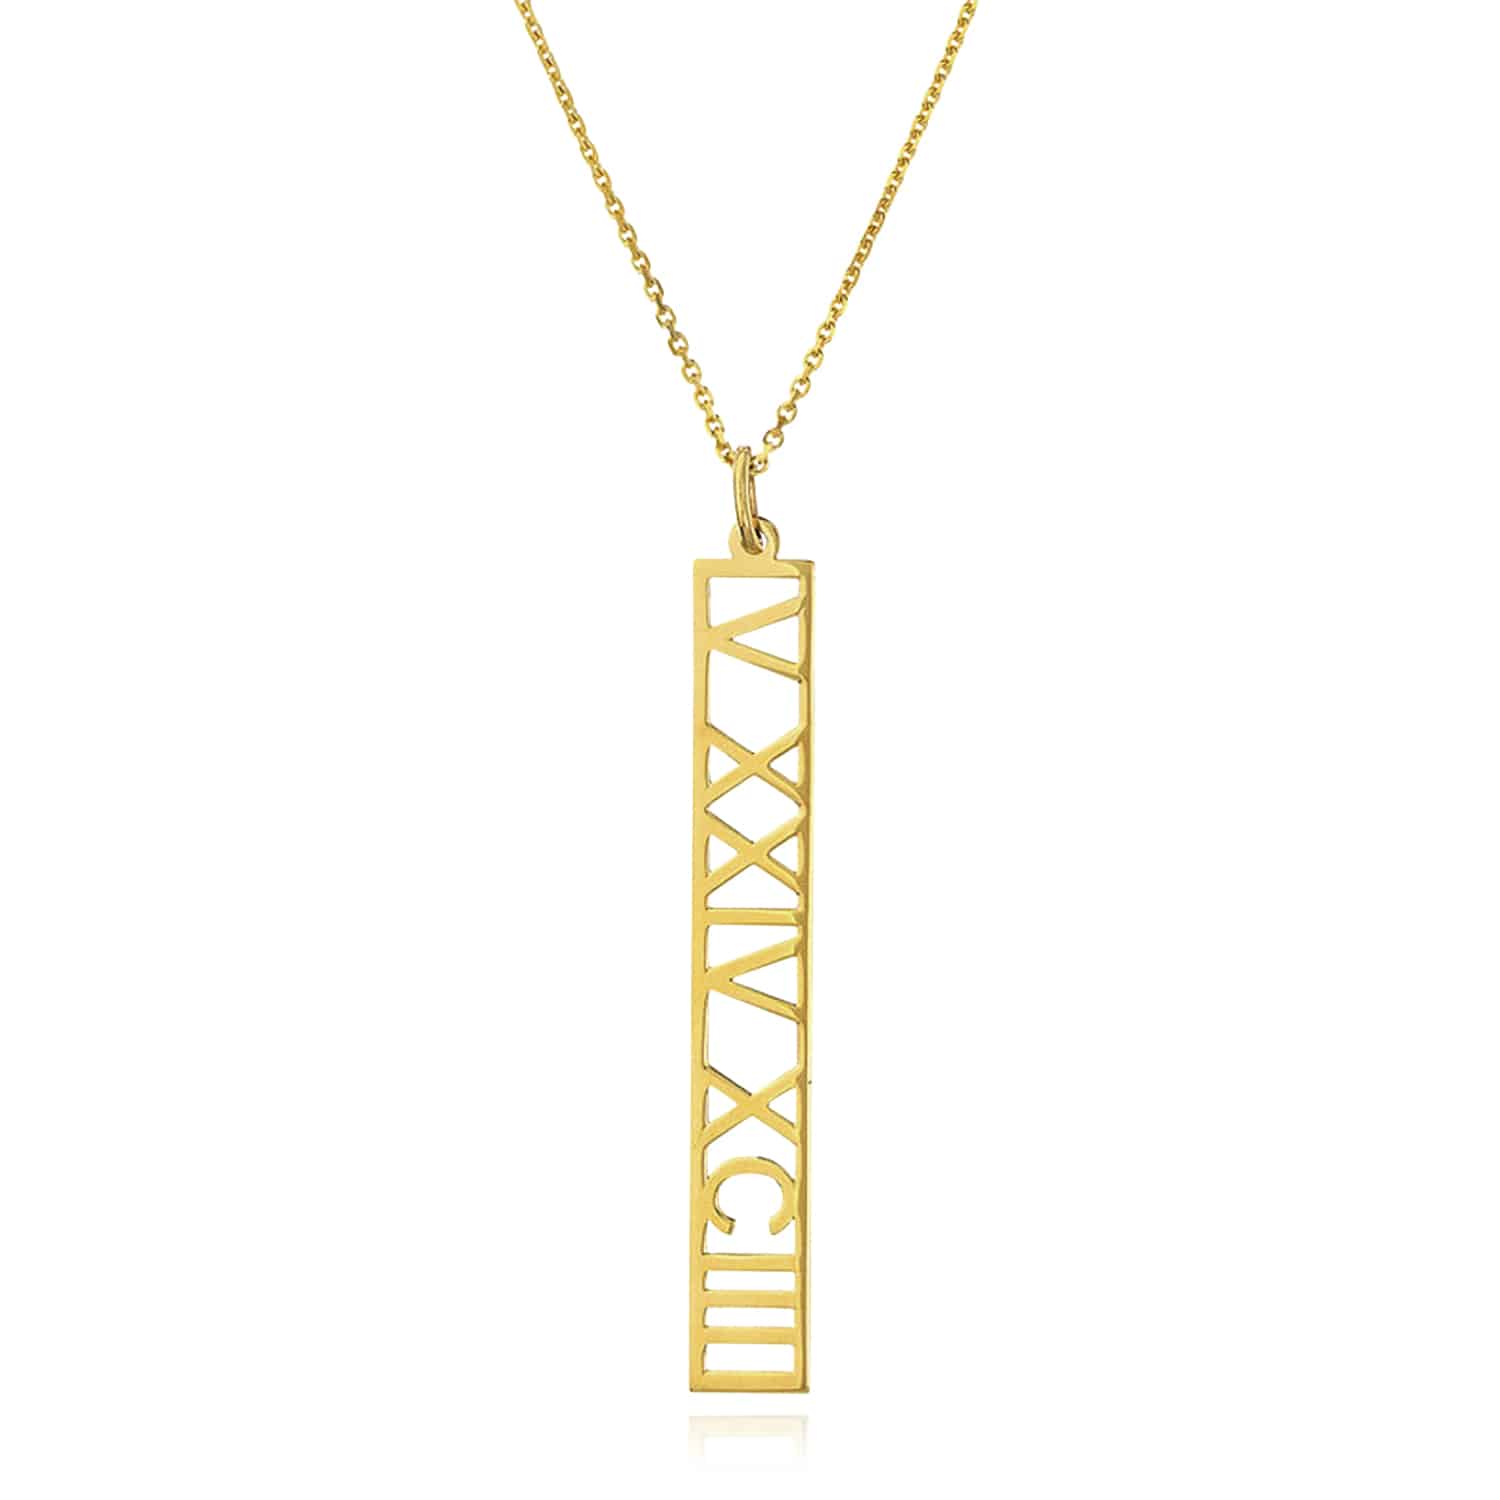 Customizable 14K Gold Yellow White Rose Vertical Nameplate Pendant Necklace - Yellow Gold, 14"-16" Adjustable